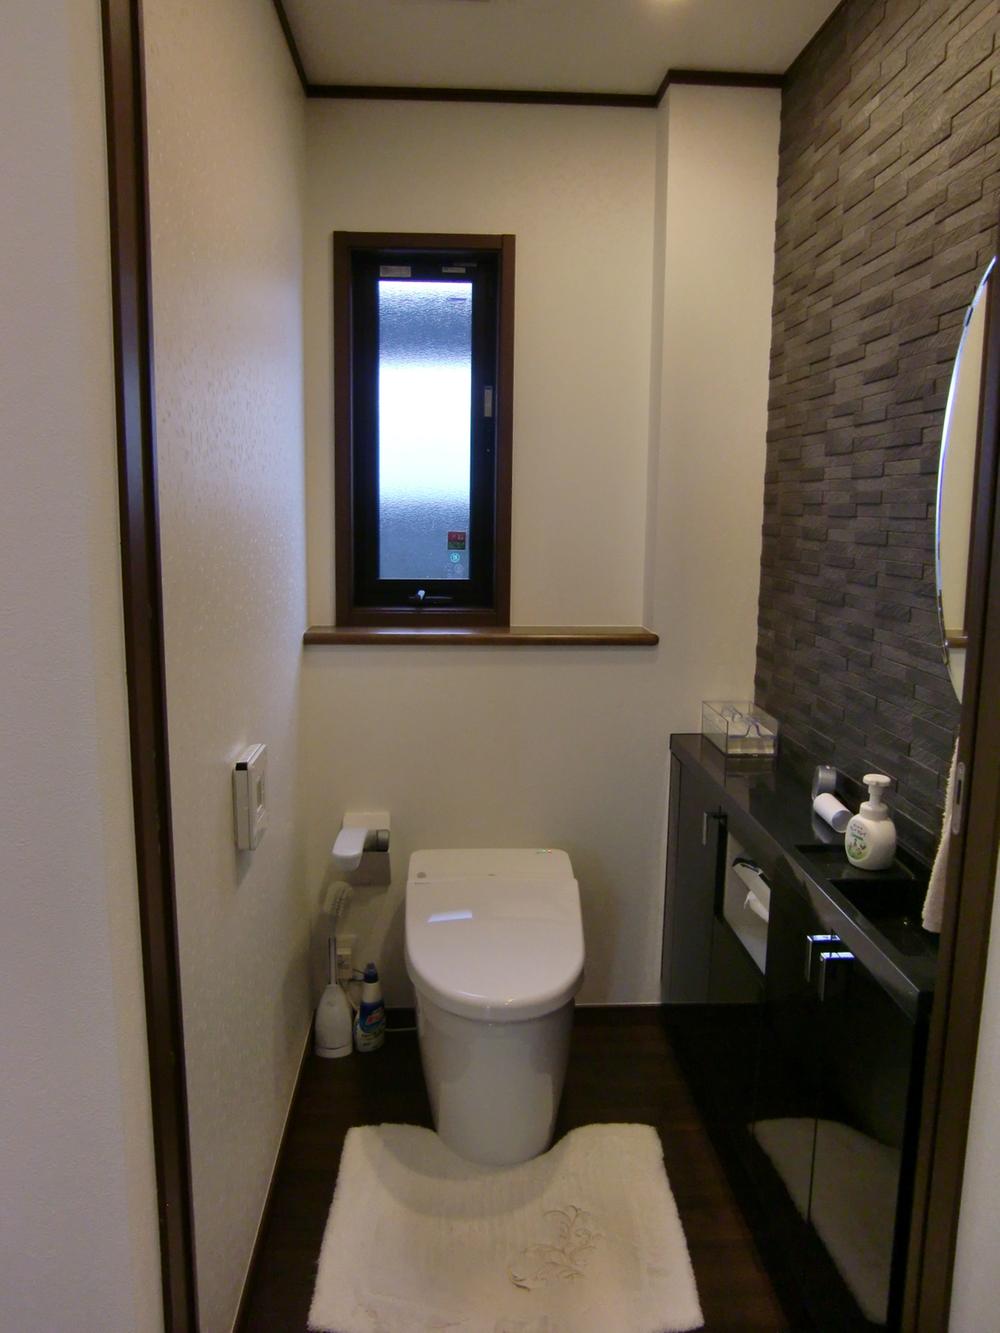 Toilet. Friendly barrier-free, The entrance is widely handrail also with toilet